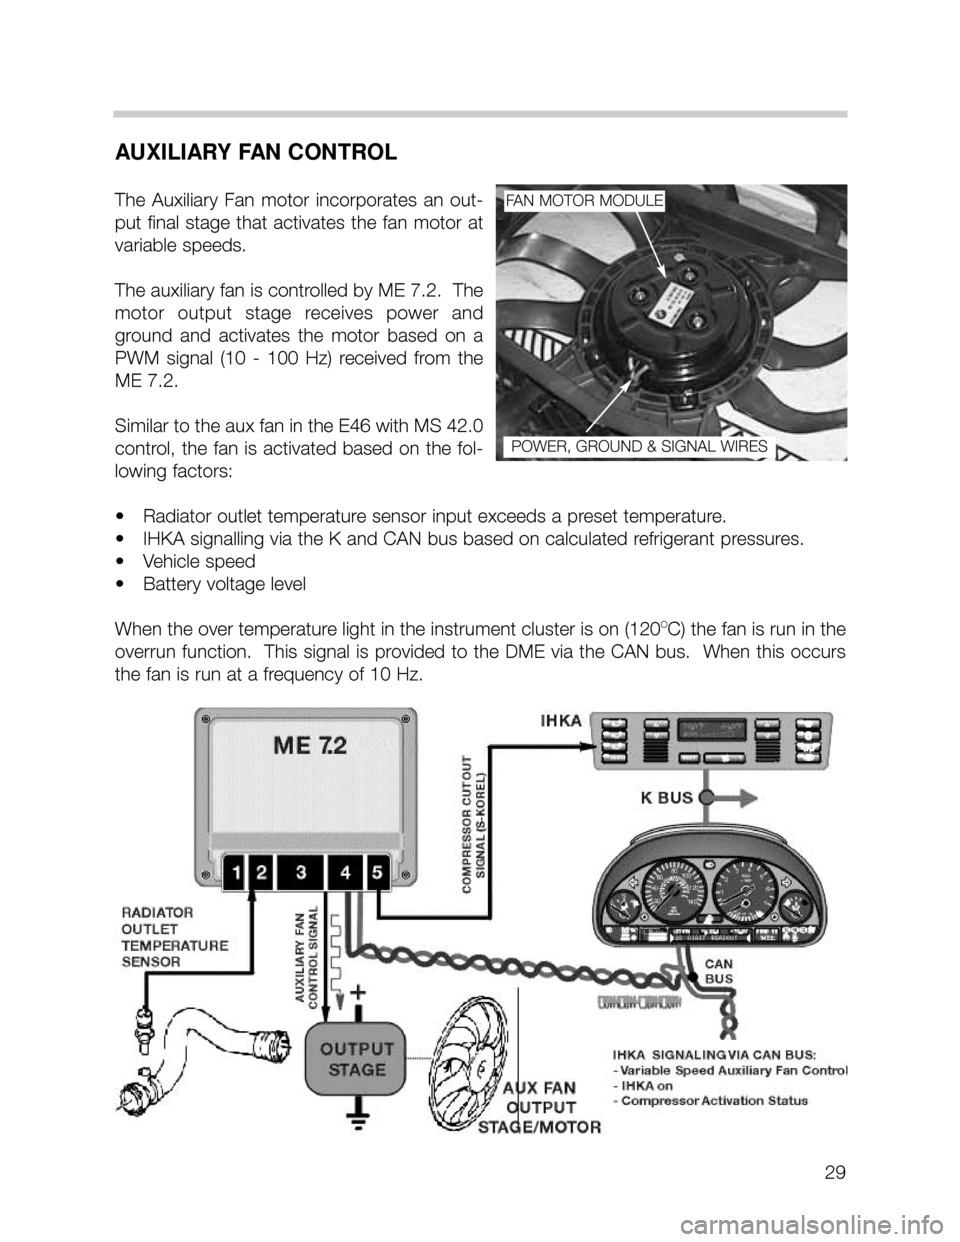 BMW 540i 1999 E39 M62TU Engine Workshop Manual 29
AUXILIARY FAN CONTROL
The  Auxiliary  Fan  motor  incorporates  an  out-
put  final  stage  that  activates  the  fan  motor  at
variable speeds.  
The auxiliary fan is controlled by ME 7.2.  The
m